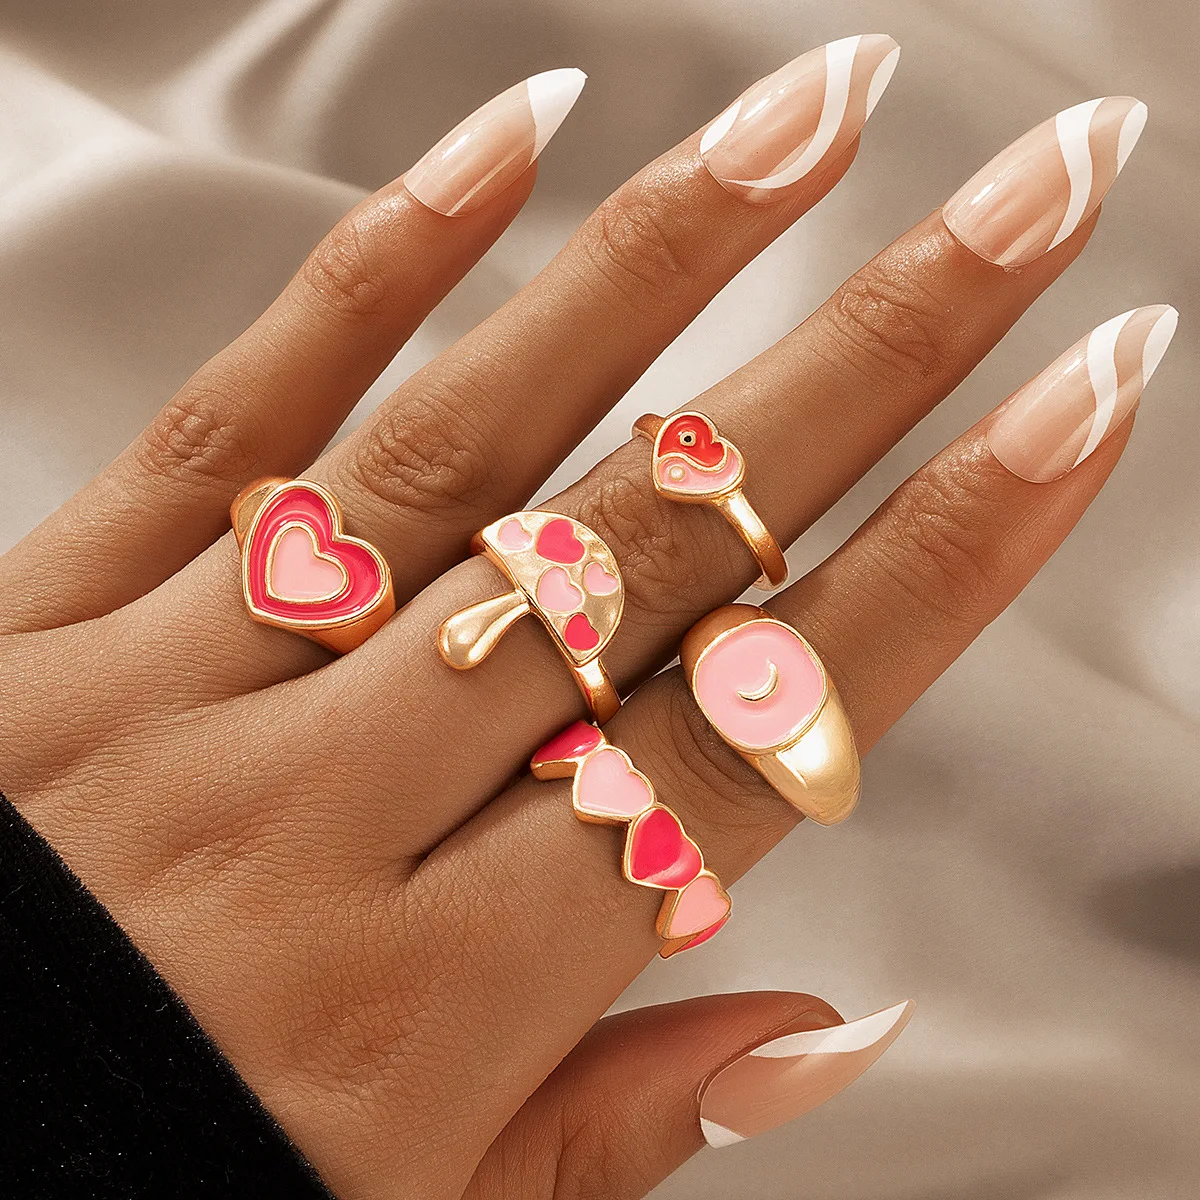 

5-piece Oil Dripping Ring for Women Pink Sweet Love Mushroom Cute Jewelry Sets Engagement Rings for Women